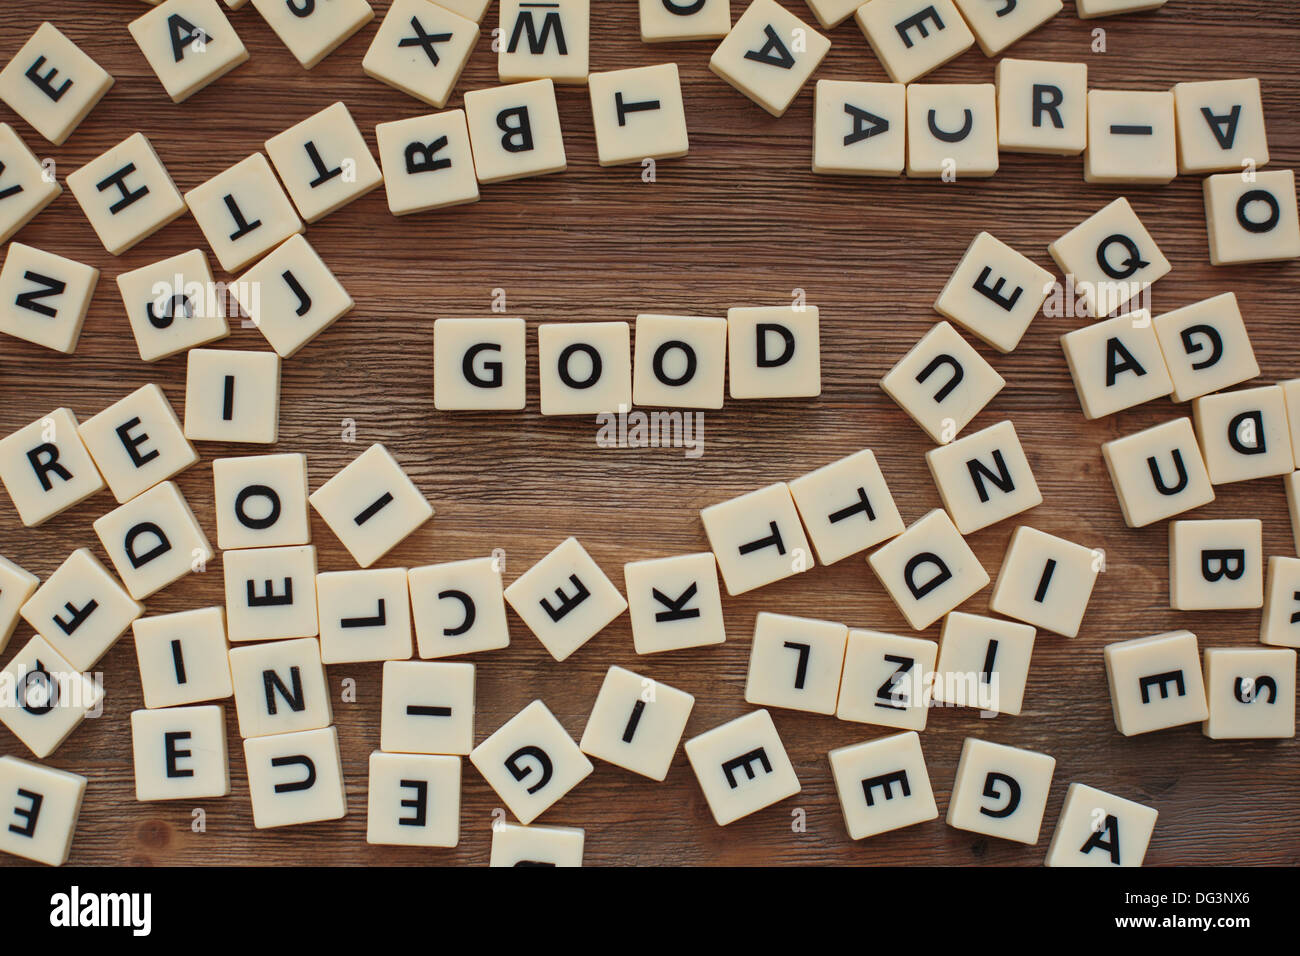 Plastic letters from a childrens' spelling game on a wooden table spell the word 'good' Stock Photo